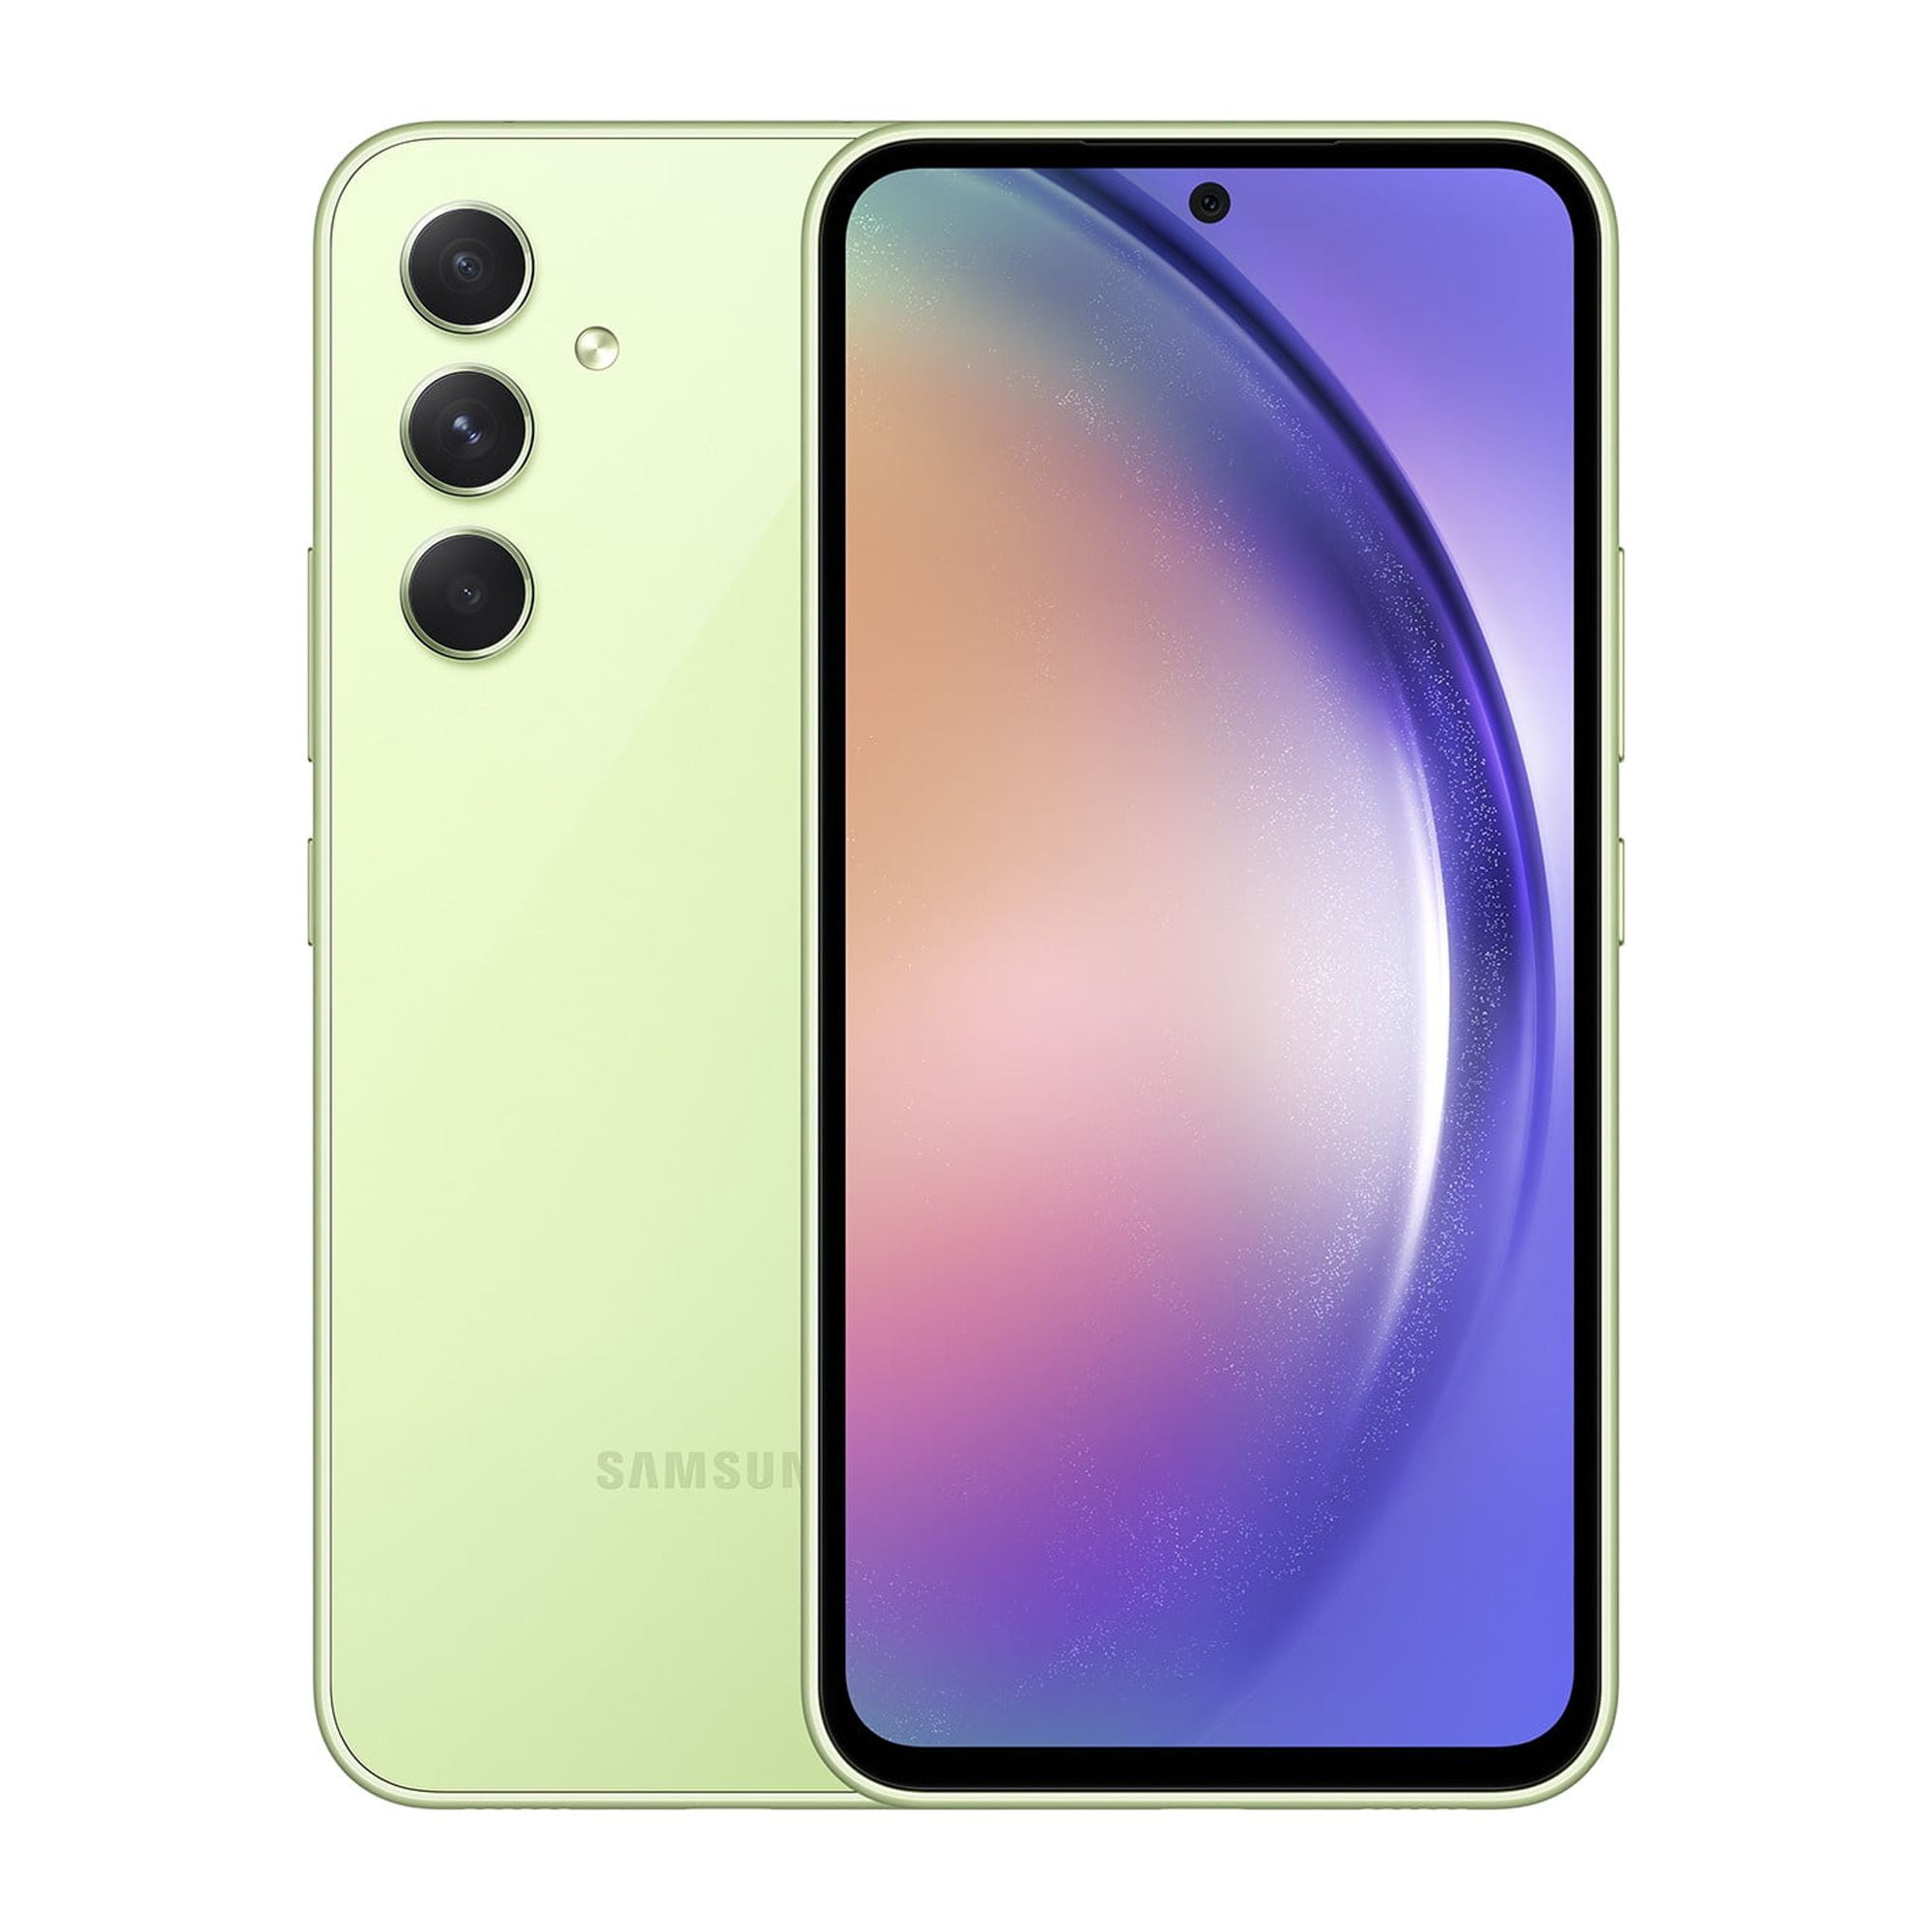  SAMSUNG Galaxy A54 5G + 4G LTE (256GB + 8GB) Unlocked Worldwide  Dual Sim (Only T-Mobile/Mint/Metro USA Market) 6.4 120Hz 50MP Triple Cam +  (25W Fast Wall Charger) (Awesome White (SM-A546M)) 